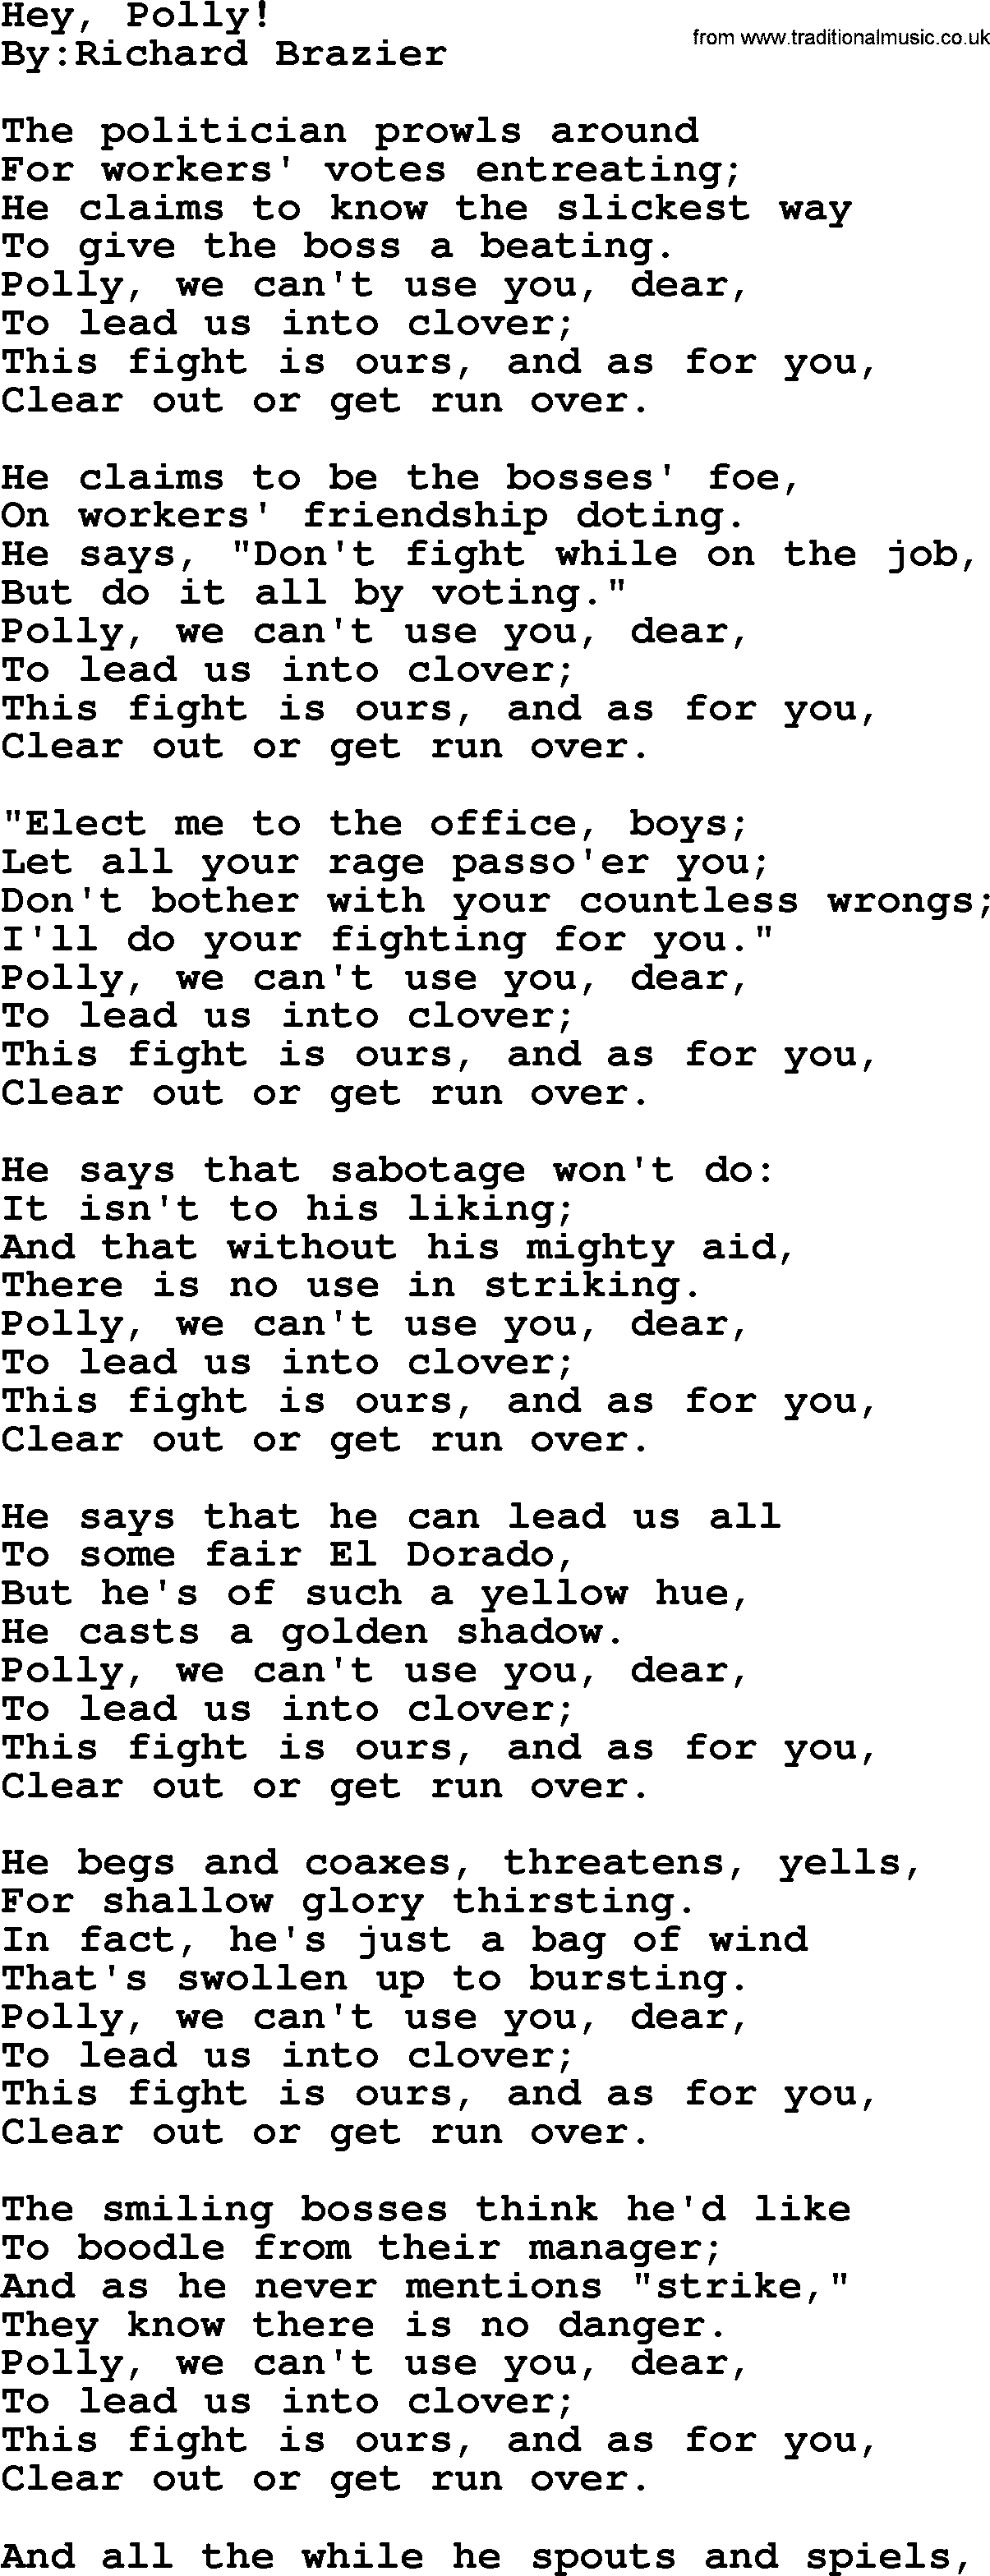 Political, Solidarity, Workers or Union song: Hey Polly, lyrics